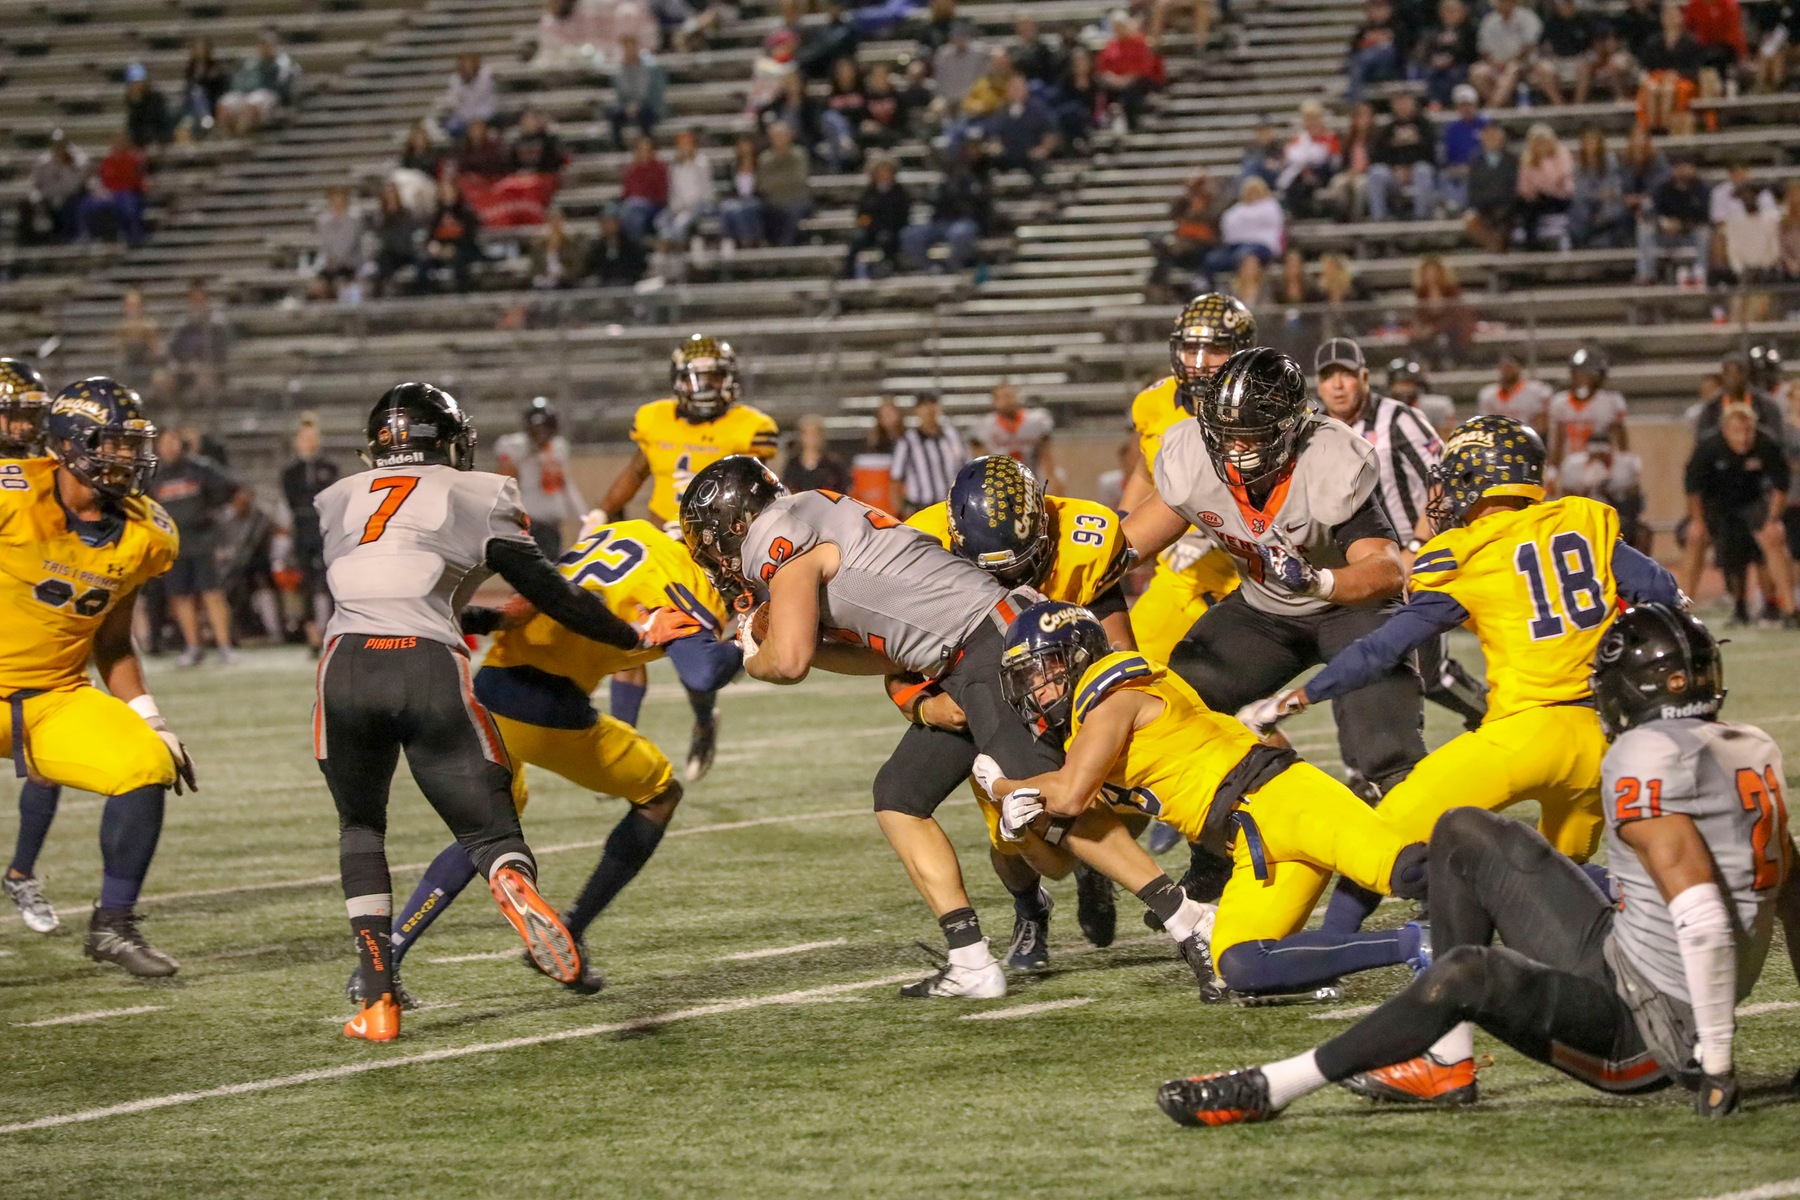 College of the Canyons football vs. Ventura College on Oct. 27, 2018.